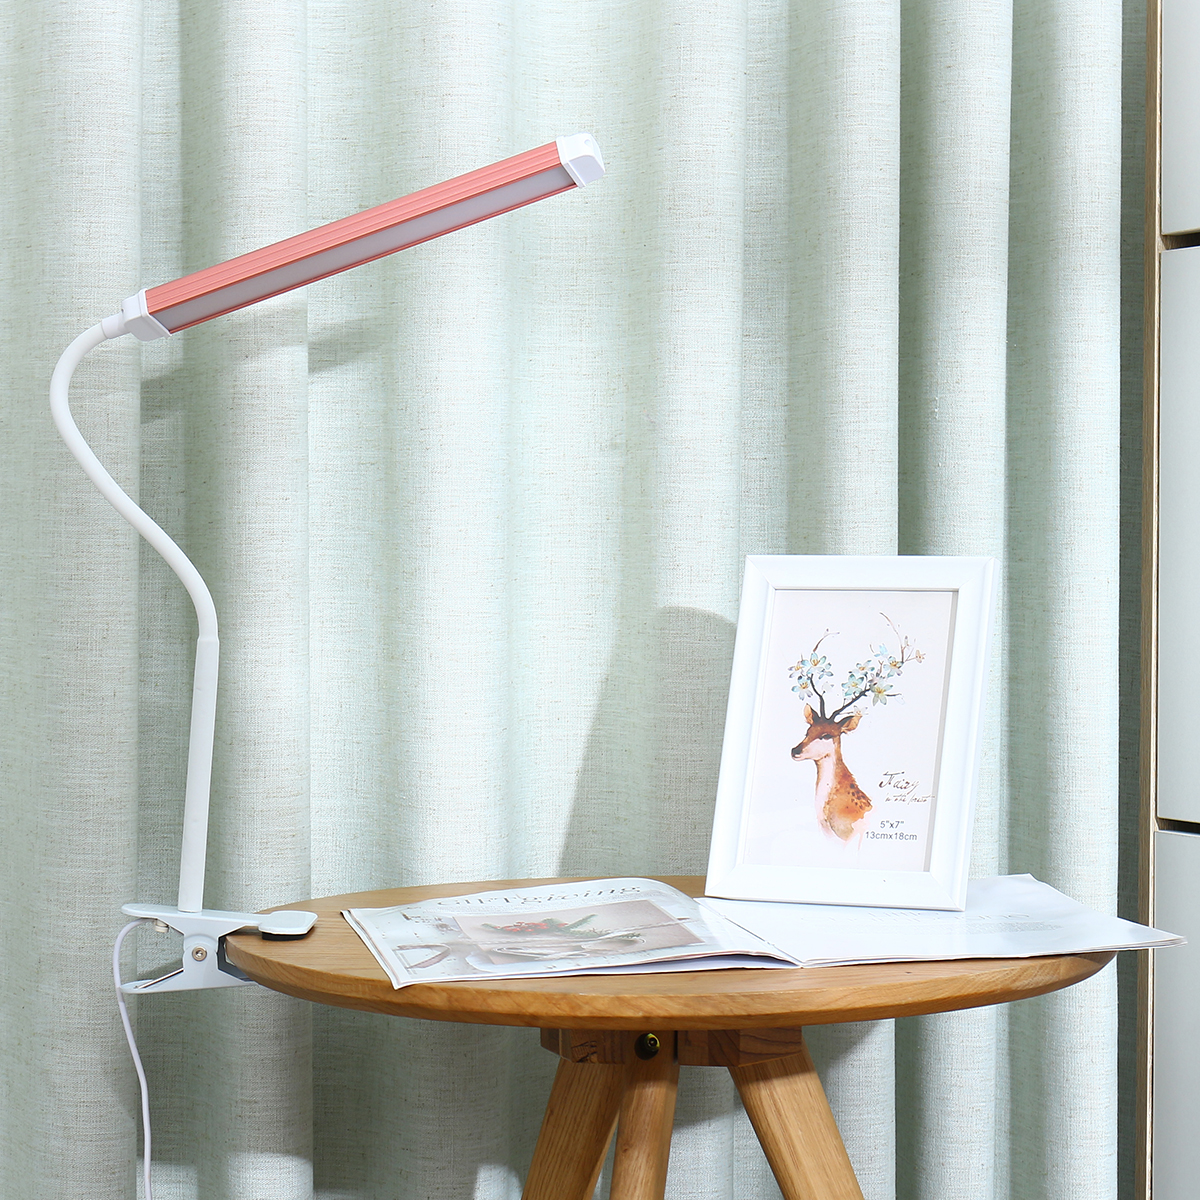 Magnifying-LED-Lamp-USB-Charging-Table-Light-Clip-on-Lamp-Beauty-Tattoo-Reading-1751255-11